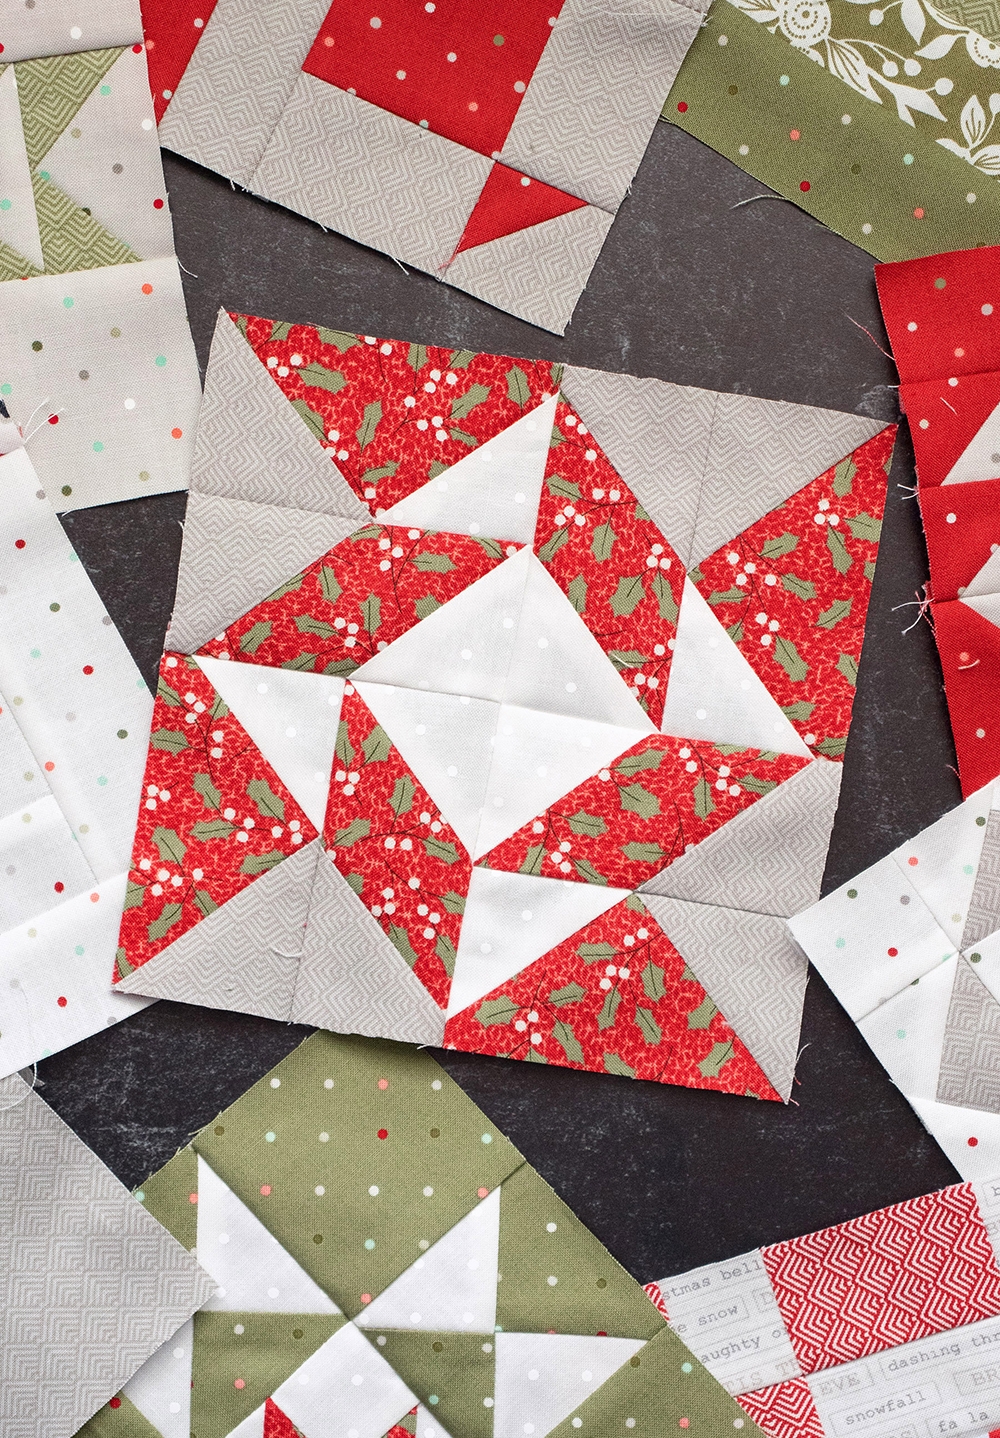 Sewcialites Quilt Along: Free Block of the Week. Block 8 is "Soulful" by Joanna FIgueroa of Fig Tree Quilts. Fabric is Christmas Morning by Lella Boutique.